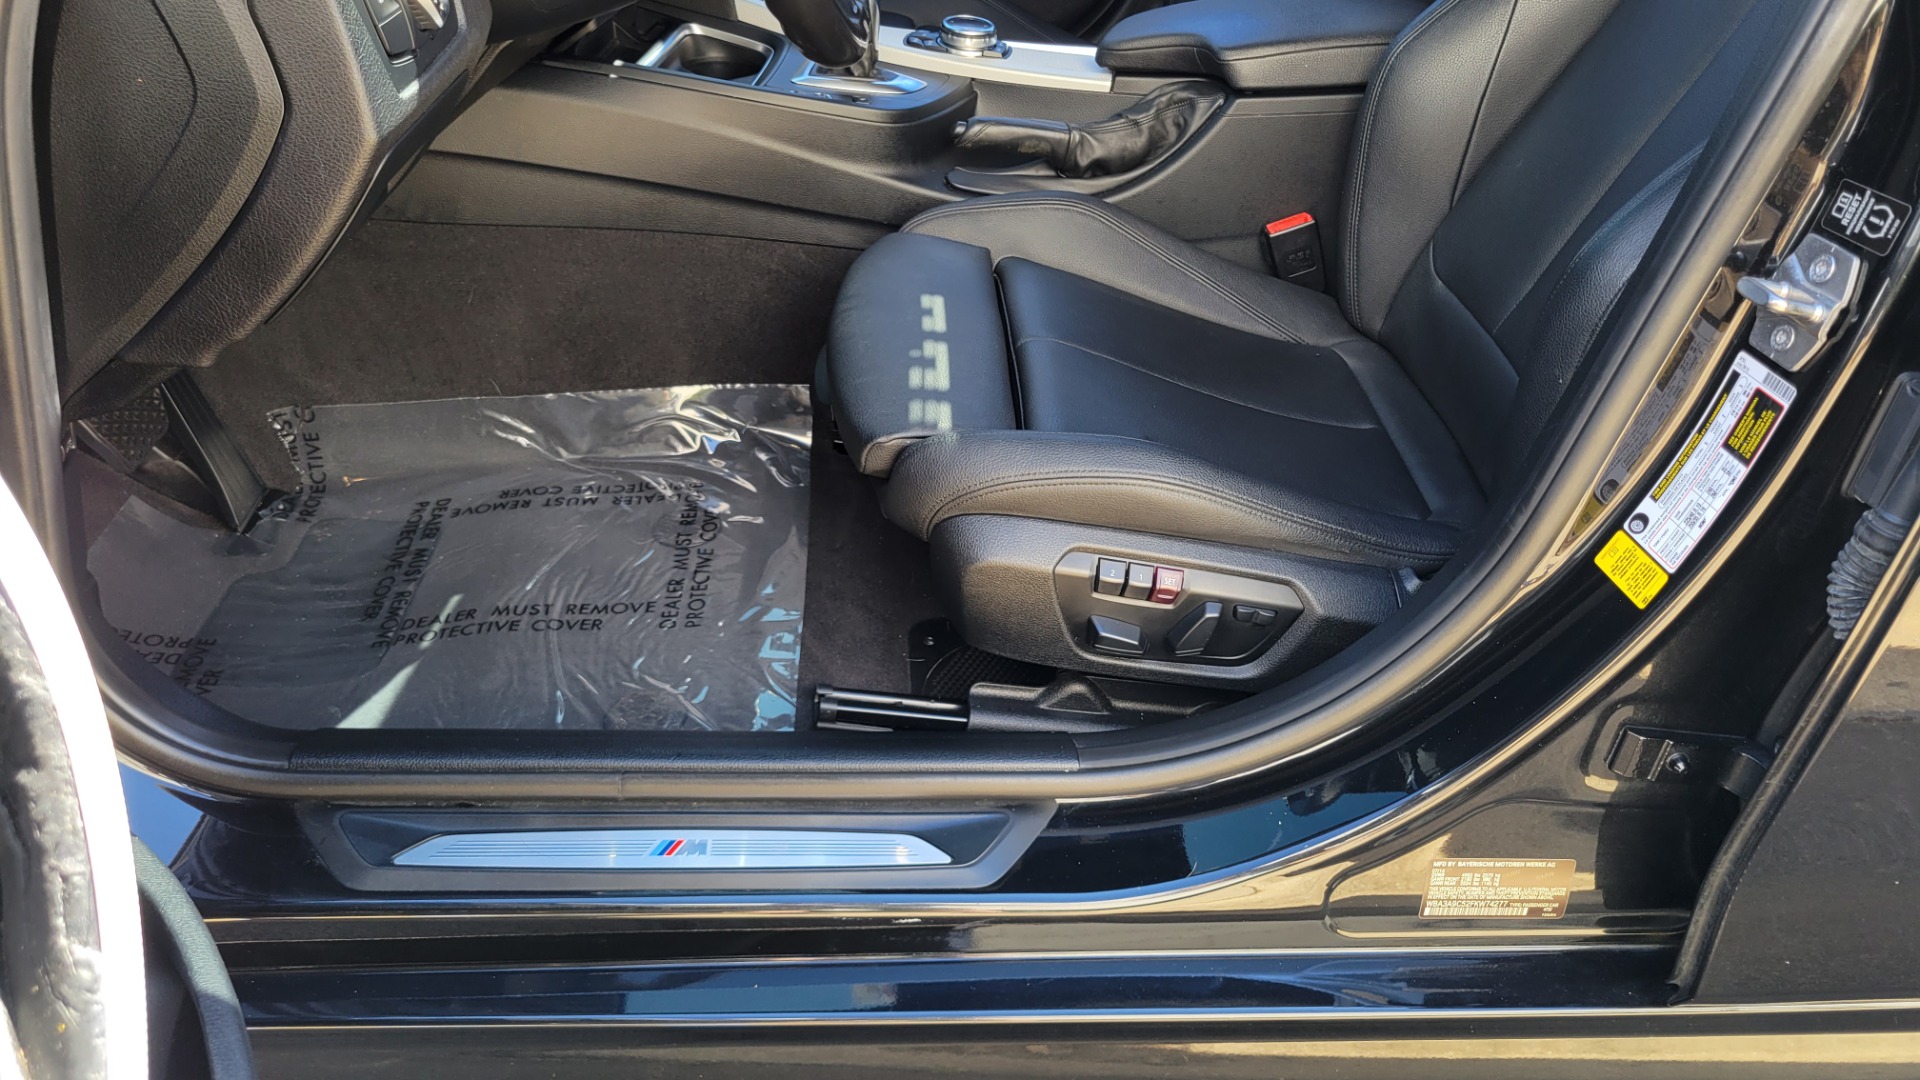 Driver seat repair - BMW X5 and X6 Forum (F15/F16)